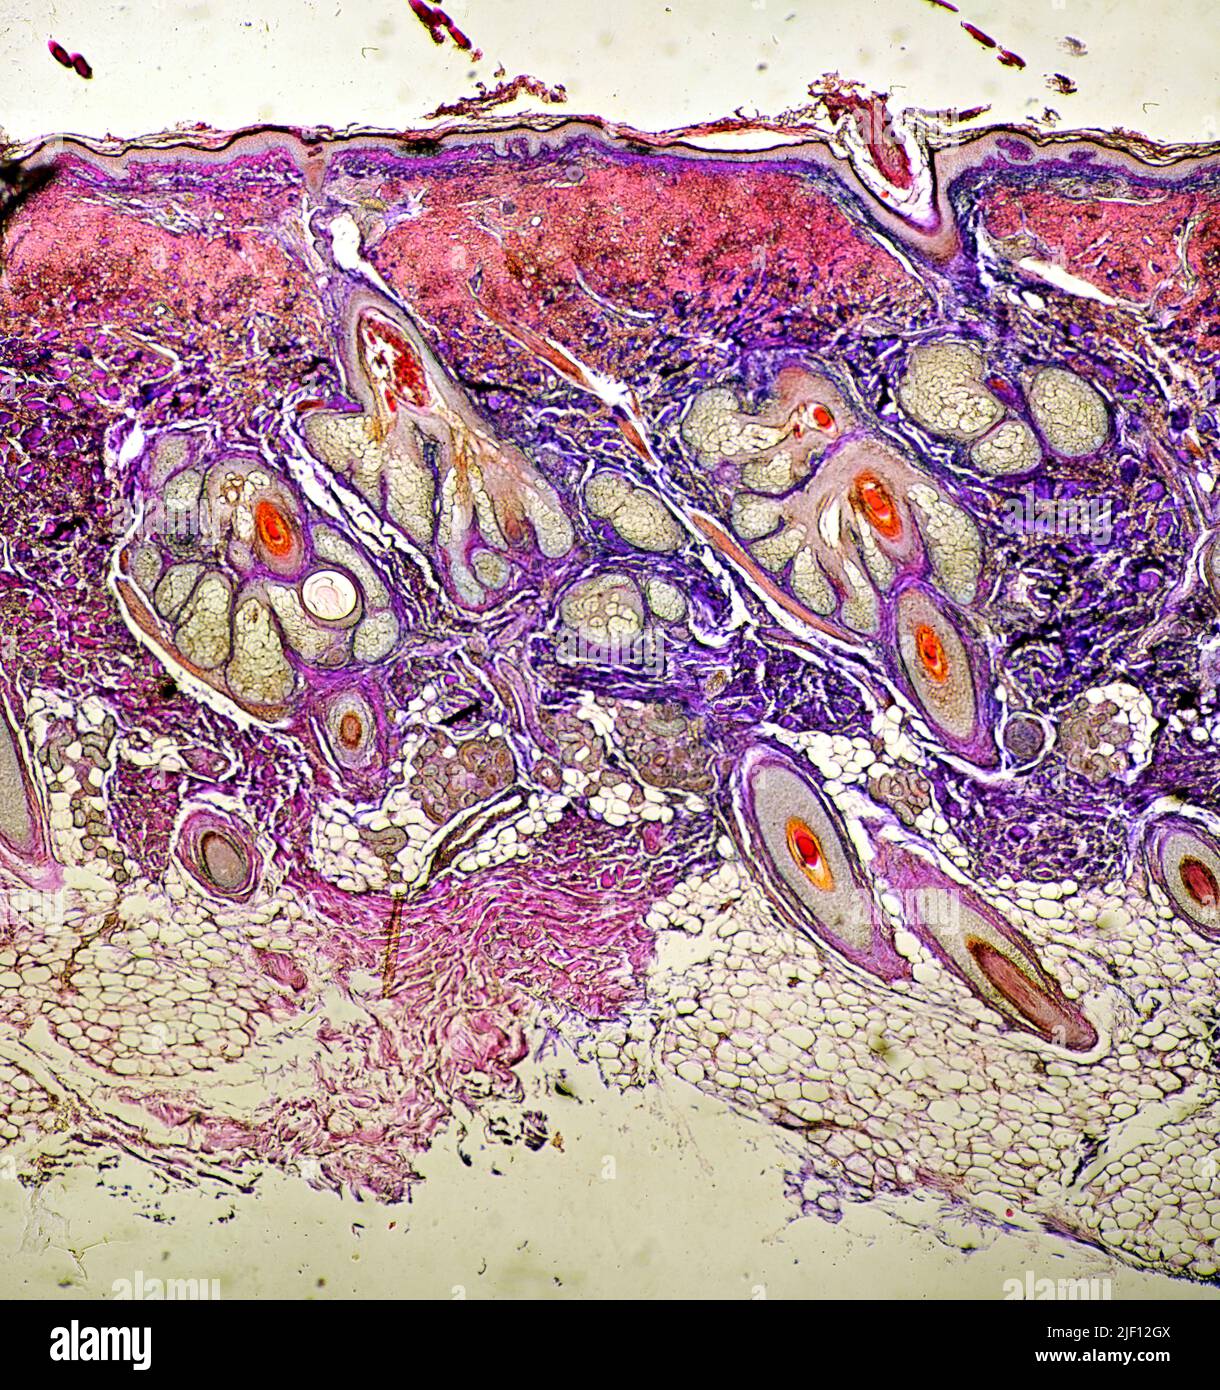 Cross section of the skin from human head with 'hair sacs' (papilla of hair), sweat glands and other structures are clearly visible. Stock Photo